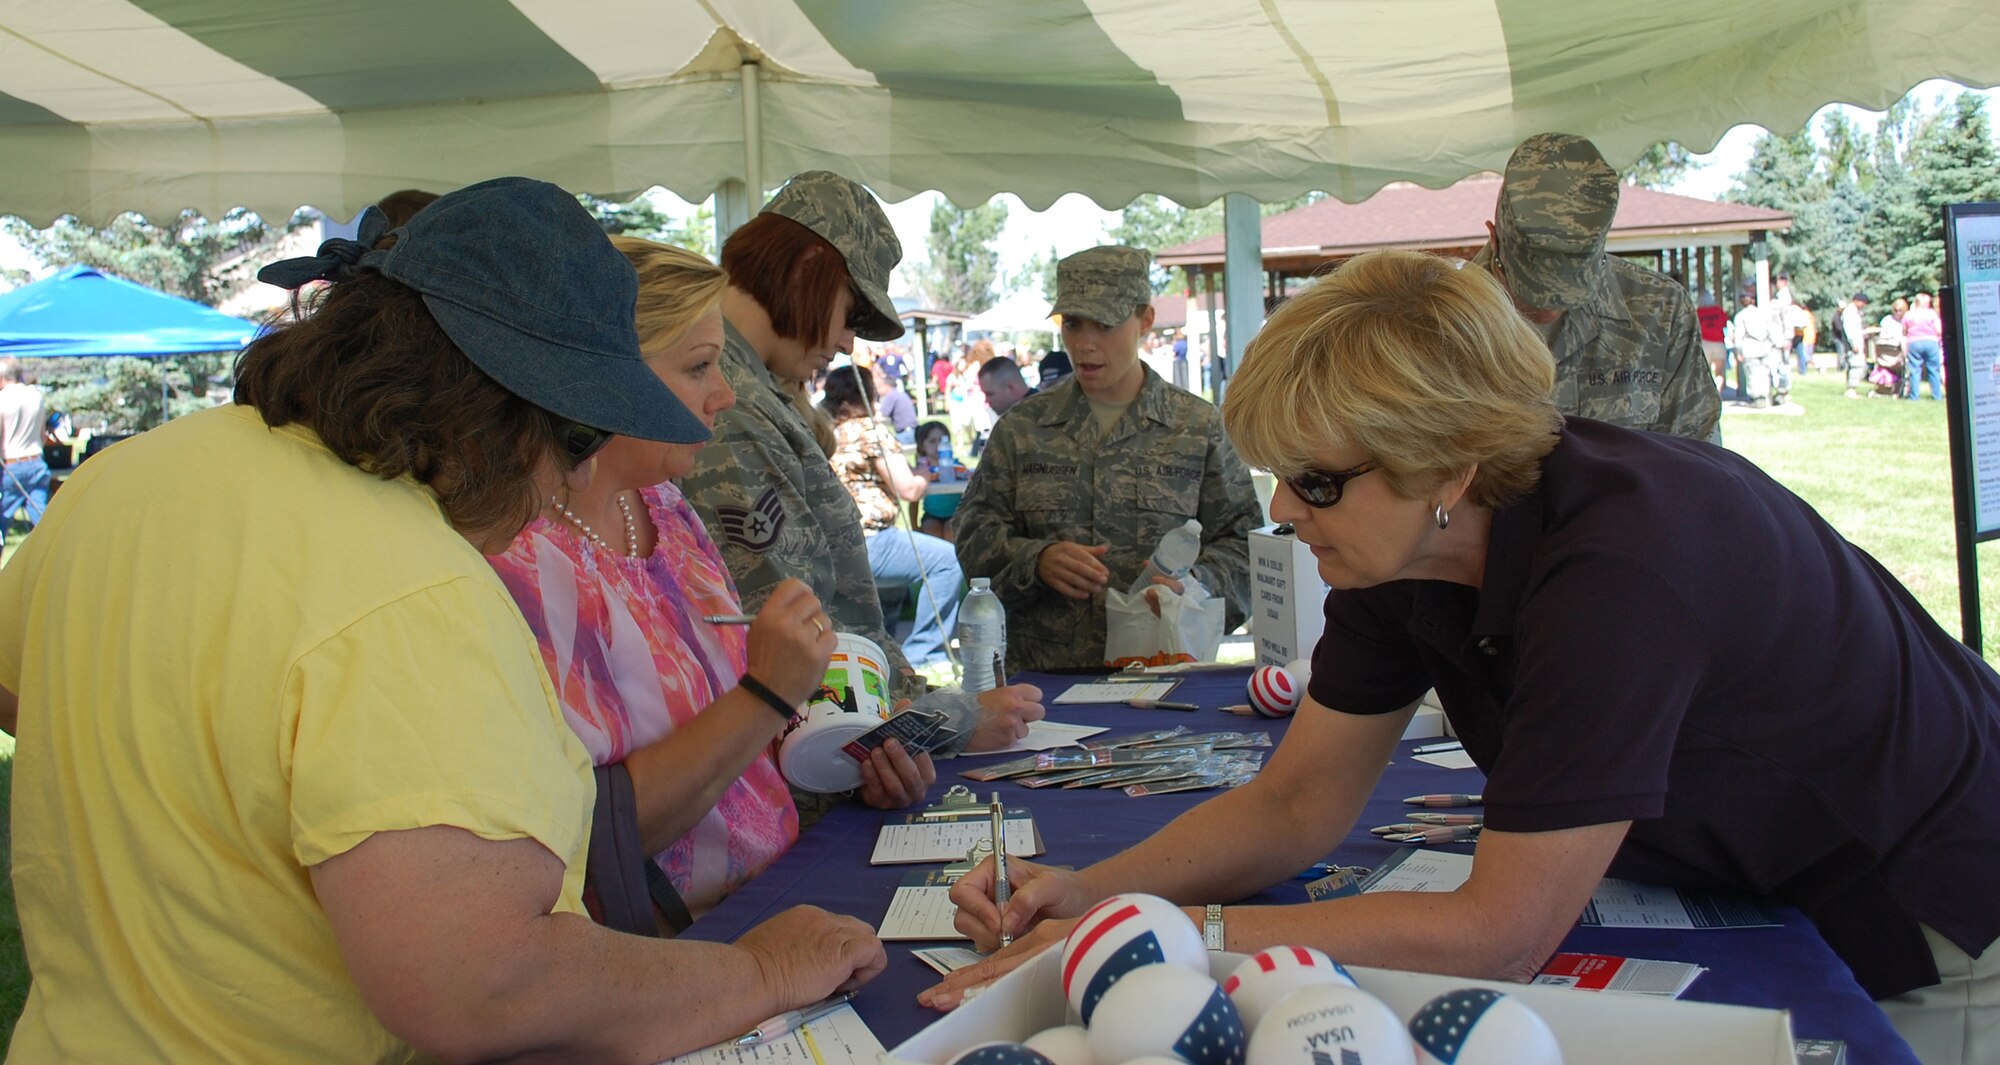 USAA representative Audrey Thompson explains some information to Joann Kiernan while other interested people look over information on the orgranization. USAA was one of the many booths on hand to give out information to those attending the free annual event July 1. (U.S. Air Force photo/Valerie Mullett)